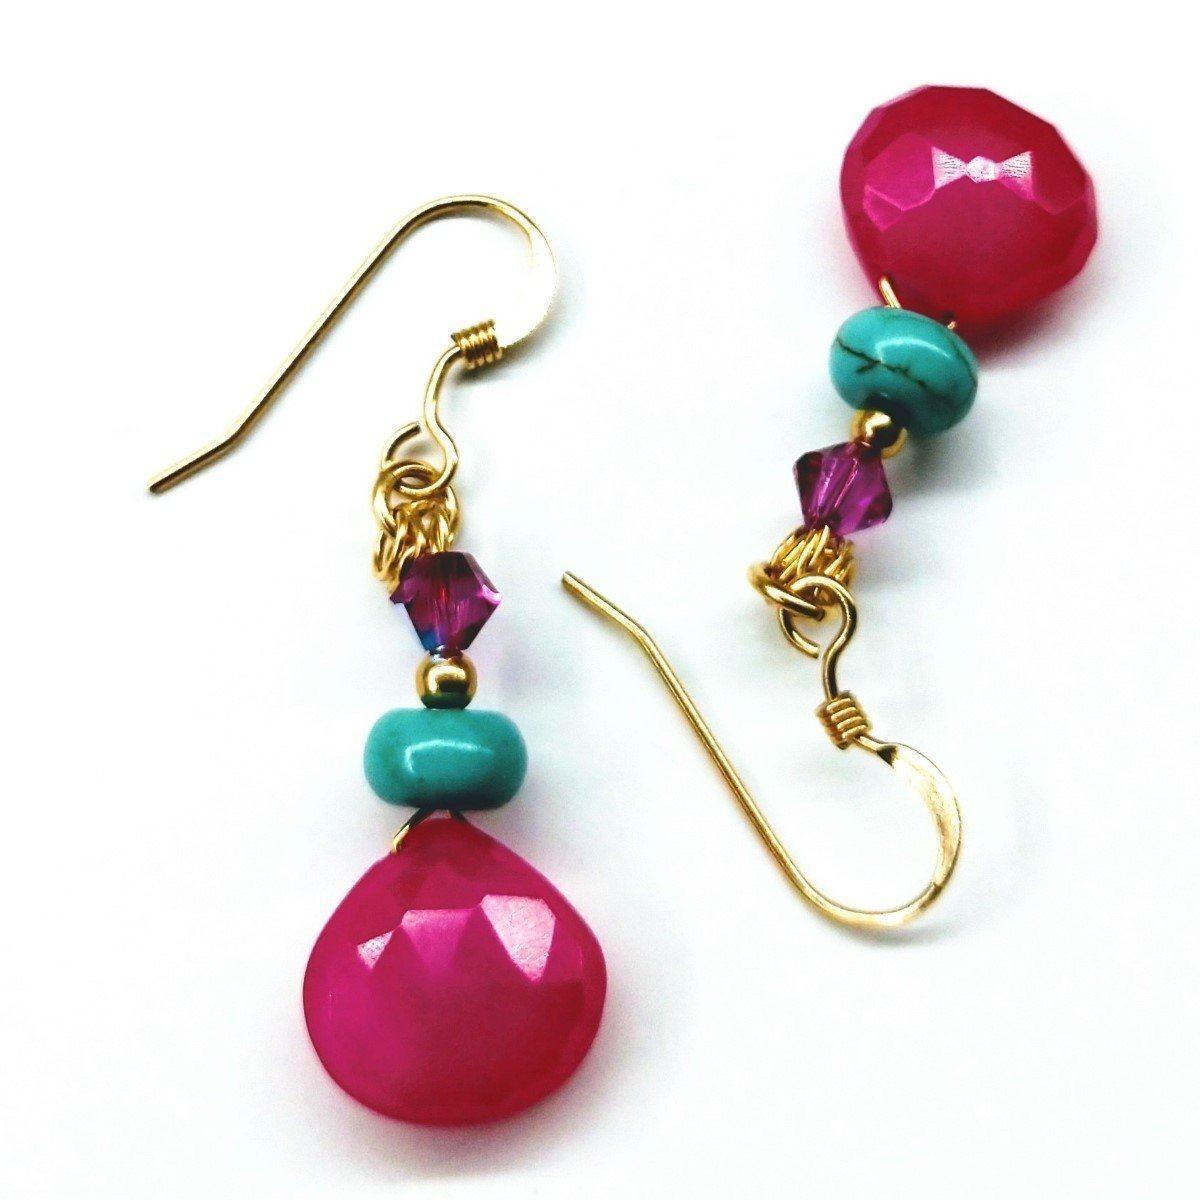 Handcrafted 14K Gold Filled Gemstone Earrings with Pink Chalcedony and Turquoise - Earrings - Bijou Her -  -  - 